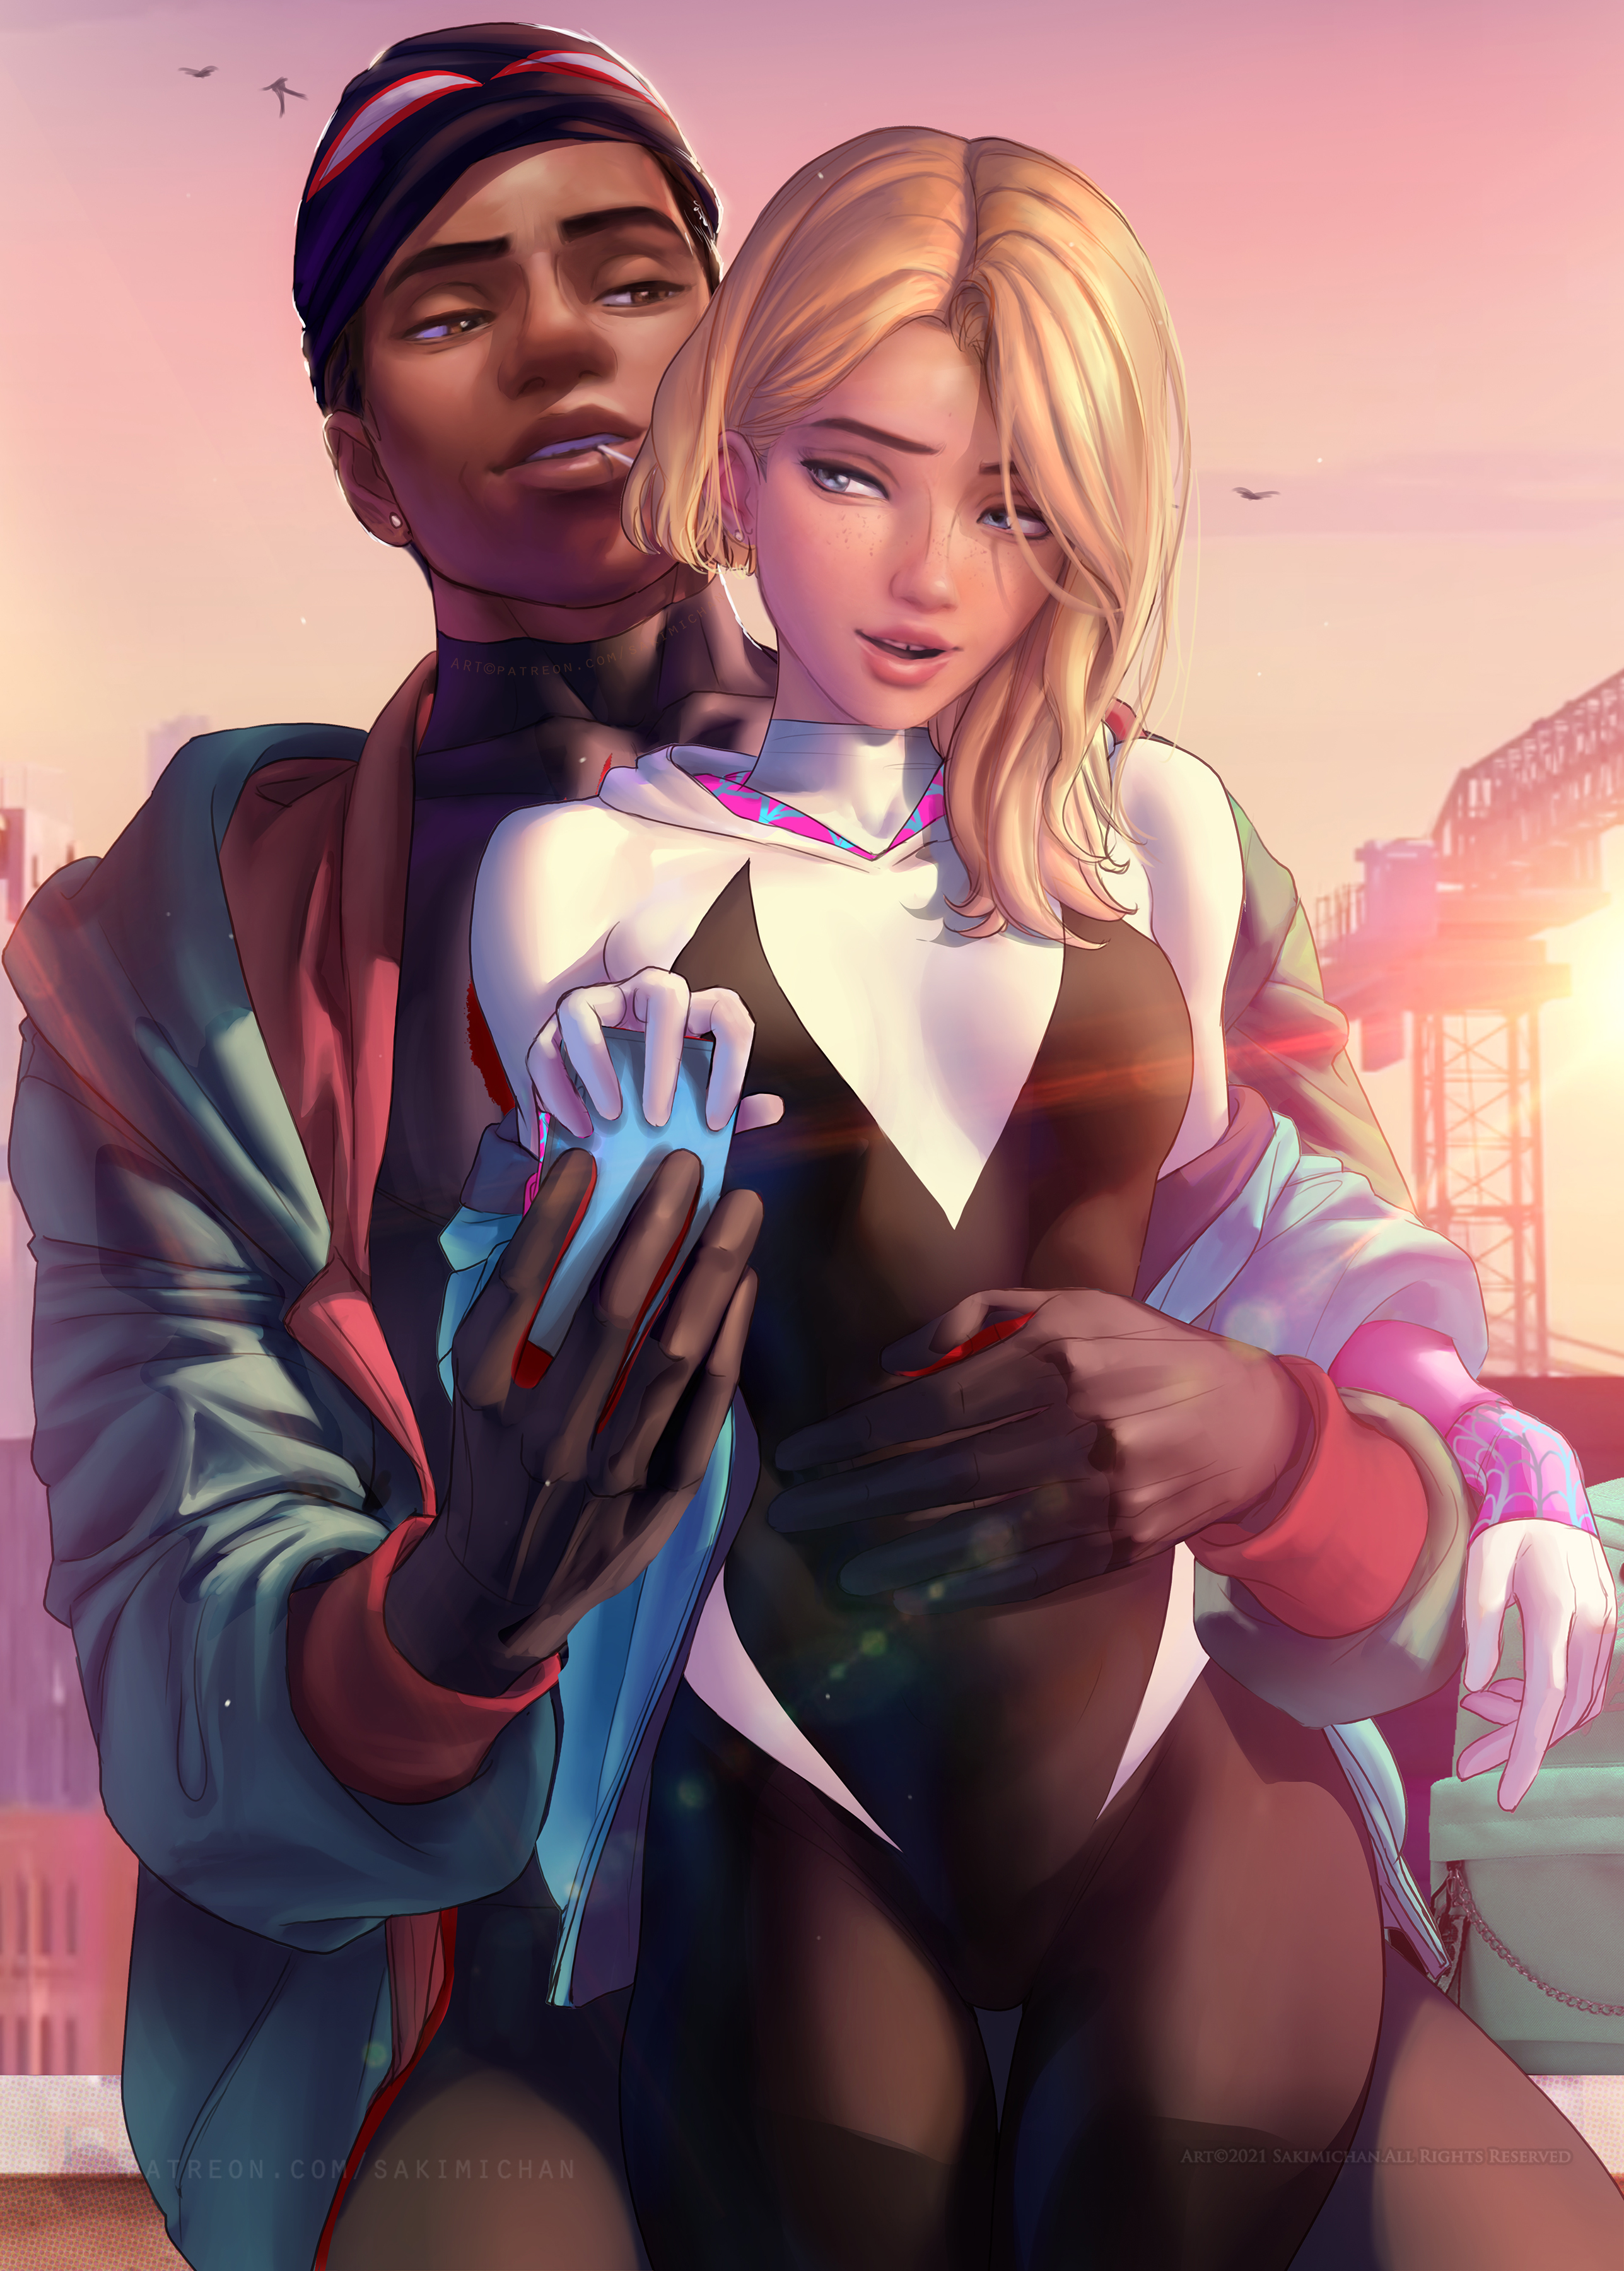 General 2575x3600 Gwen Stacy Miles Morales Spider-Man: Across the Spider-Verse fictional character blonde artwork drawing fan art Sakimichan portrait display phone watermarked bodysuit sunset sunset glow women Spider Gwen